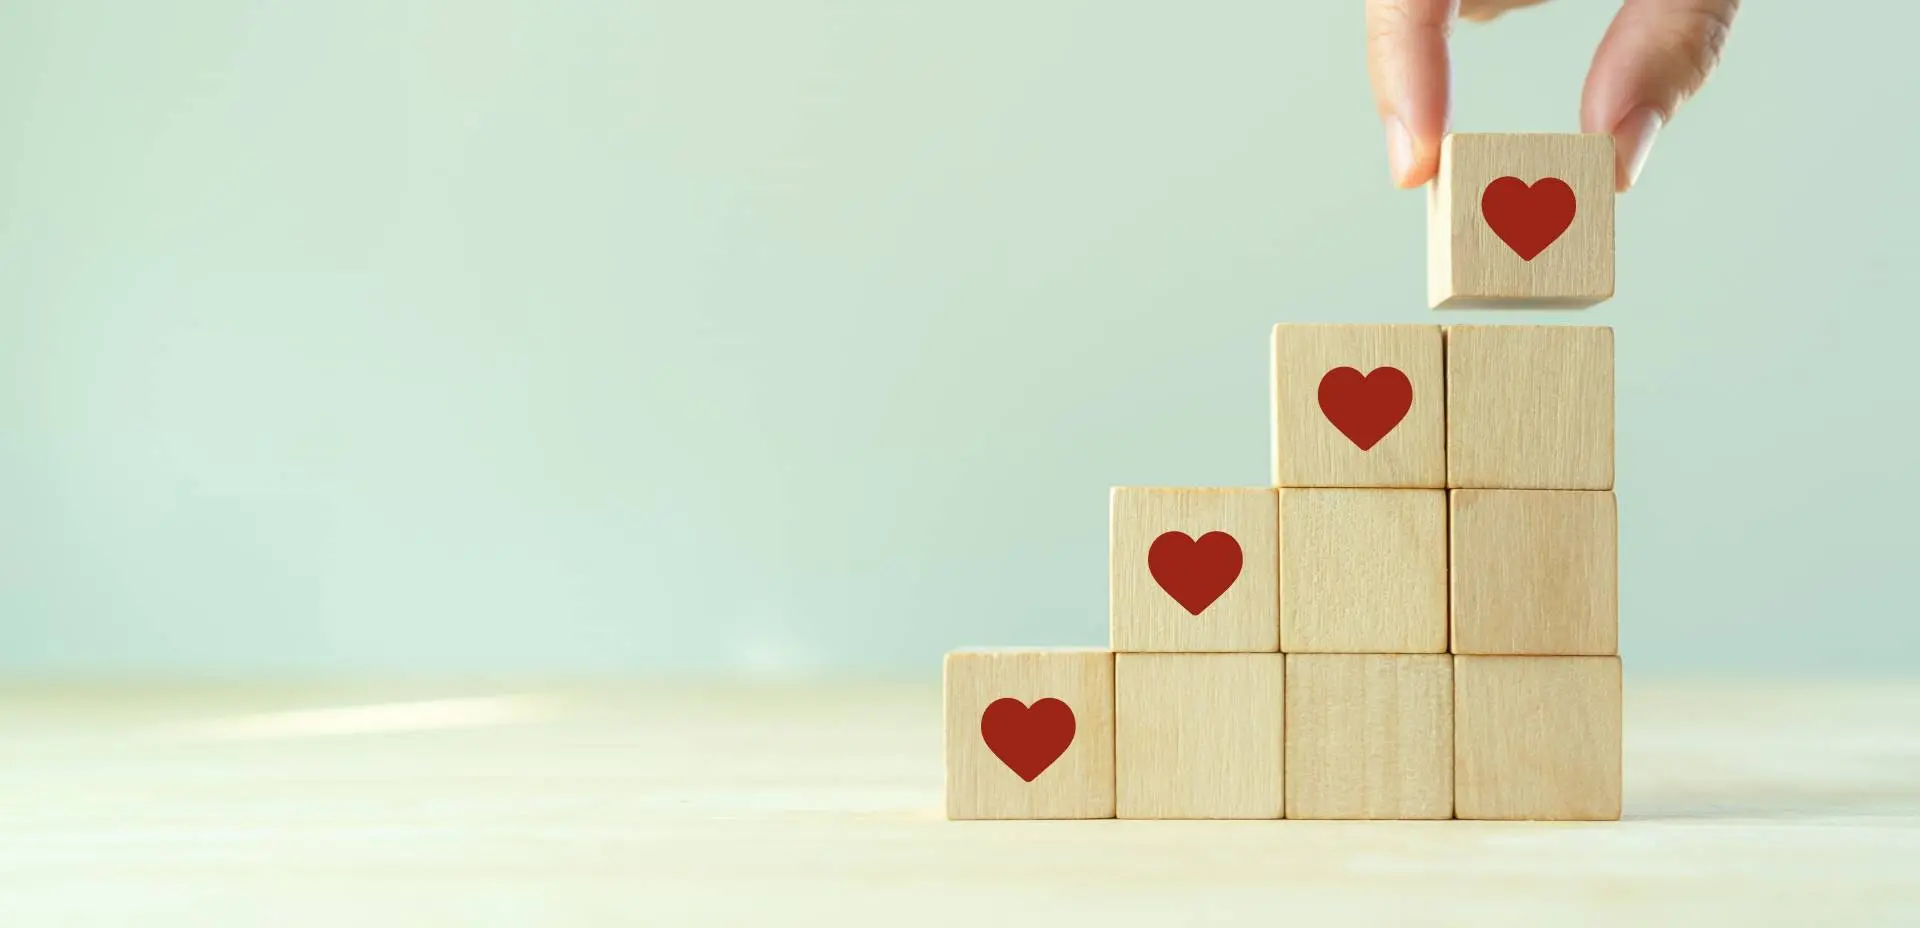 building blocks with hearts demonstrating growth of customer loyalty programs